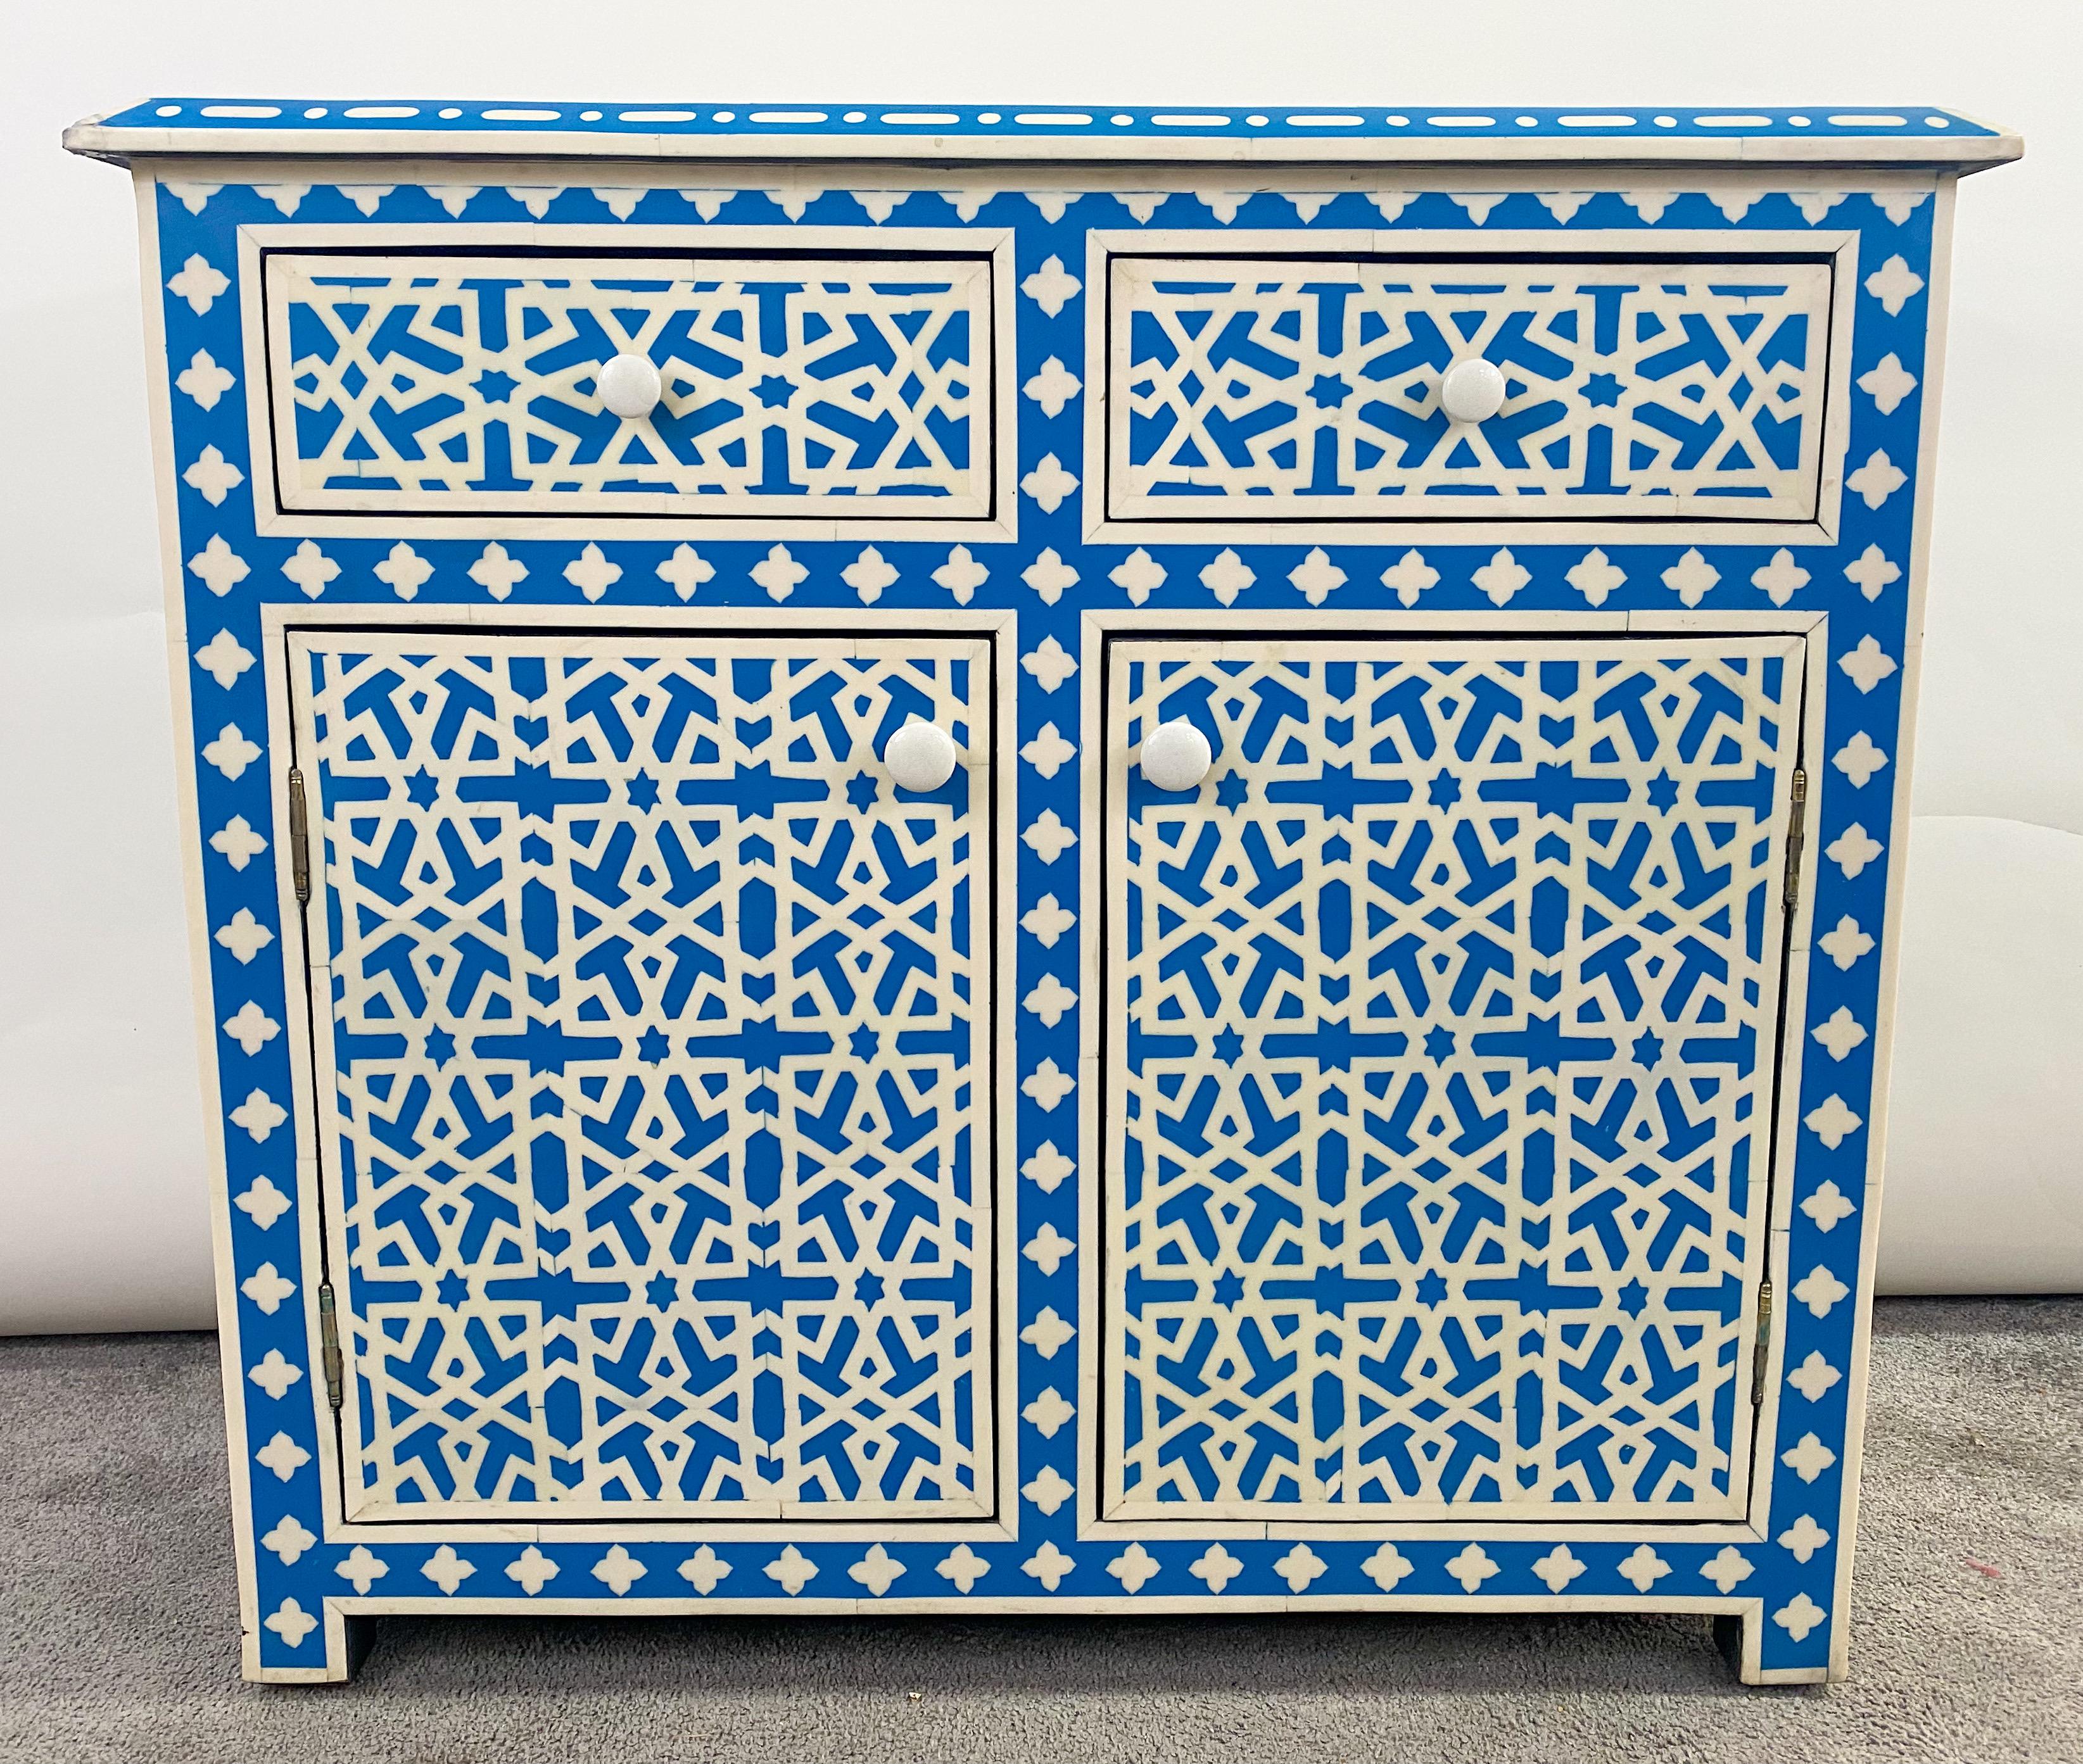 A stunning handmade Boho Chic Moroccan style cabinet or console made of resin and wood. The cabinet features exceptional Moorish geometrical  design in white and blue color. The geormetrical patterns embellish the cabinet on all sides ( except the